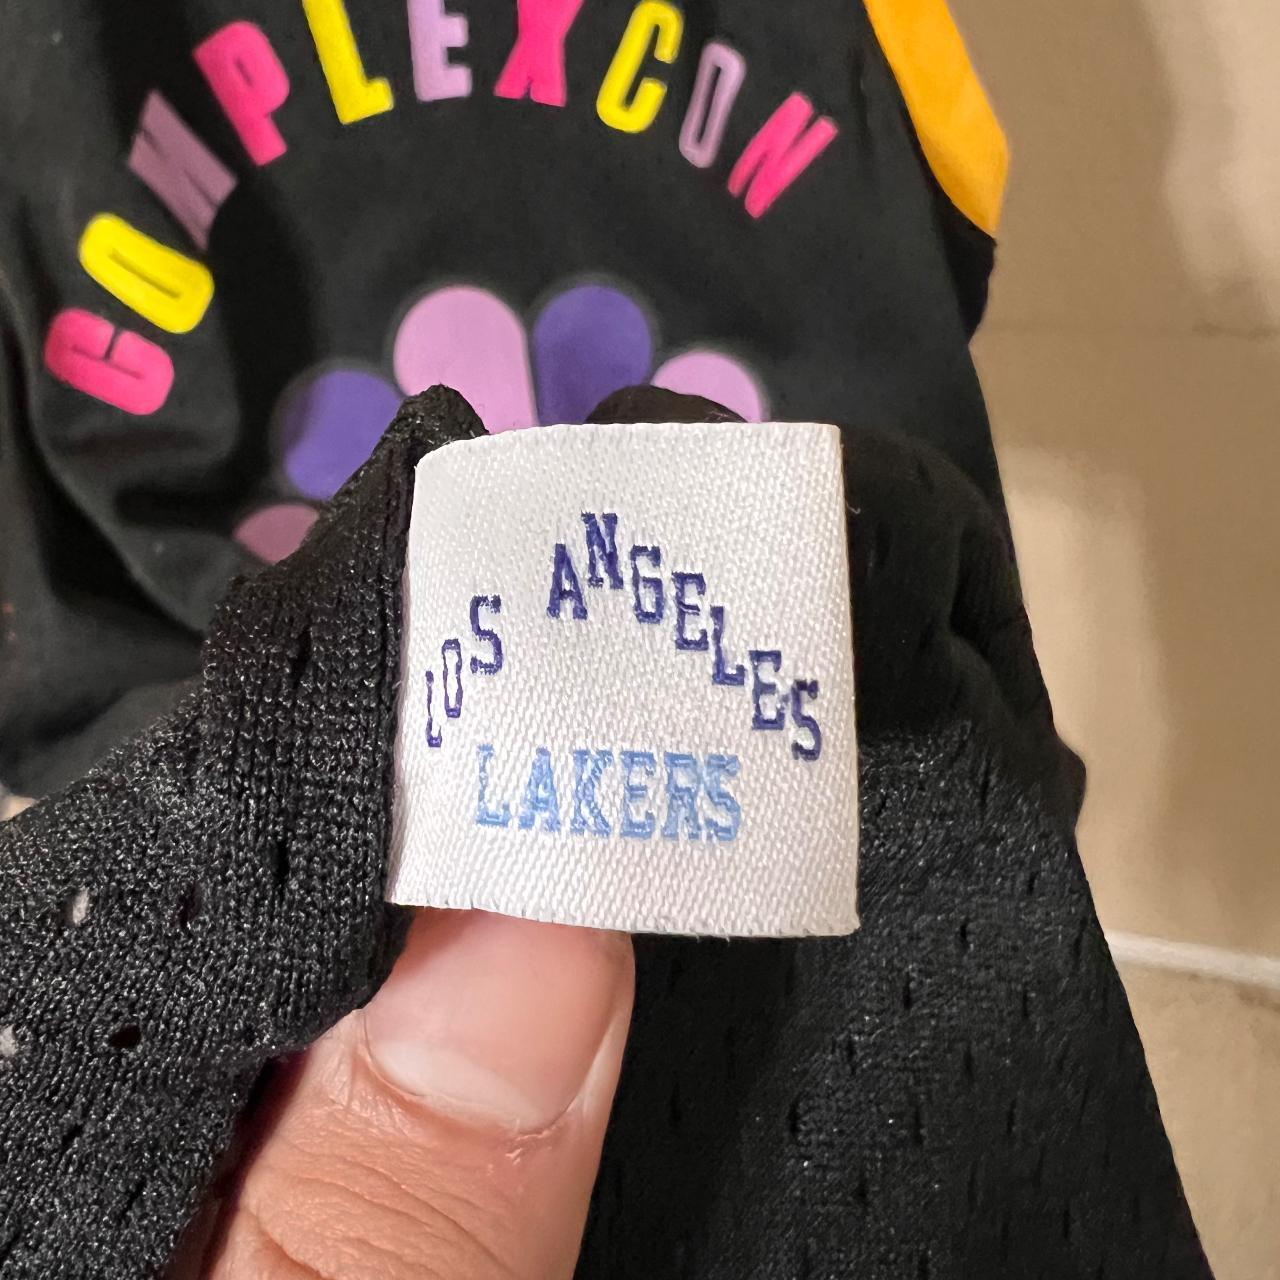 takashi murakami lakers jersey from complexcon - Depop